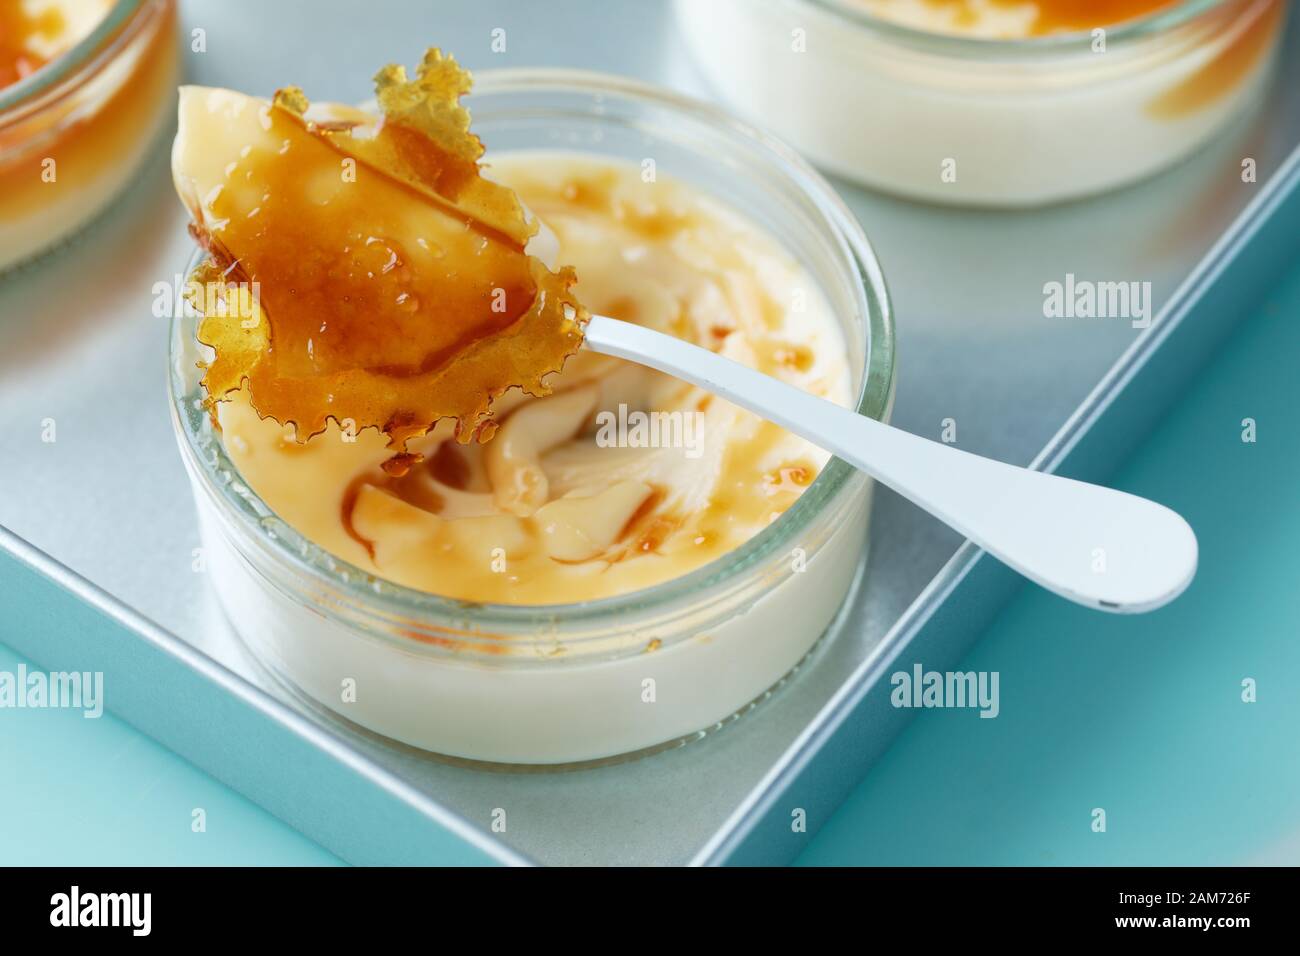 Closeup view of a portion of creme brulee dessert topped with caramelized sugar Stock Photo